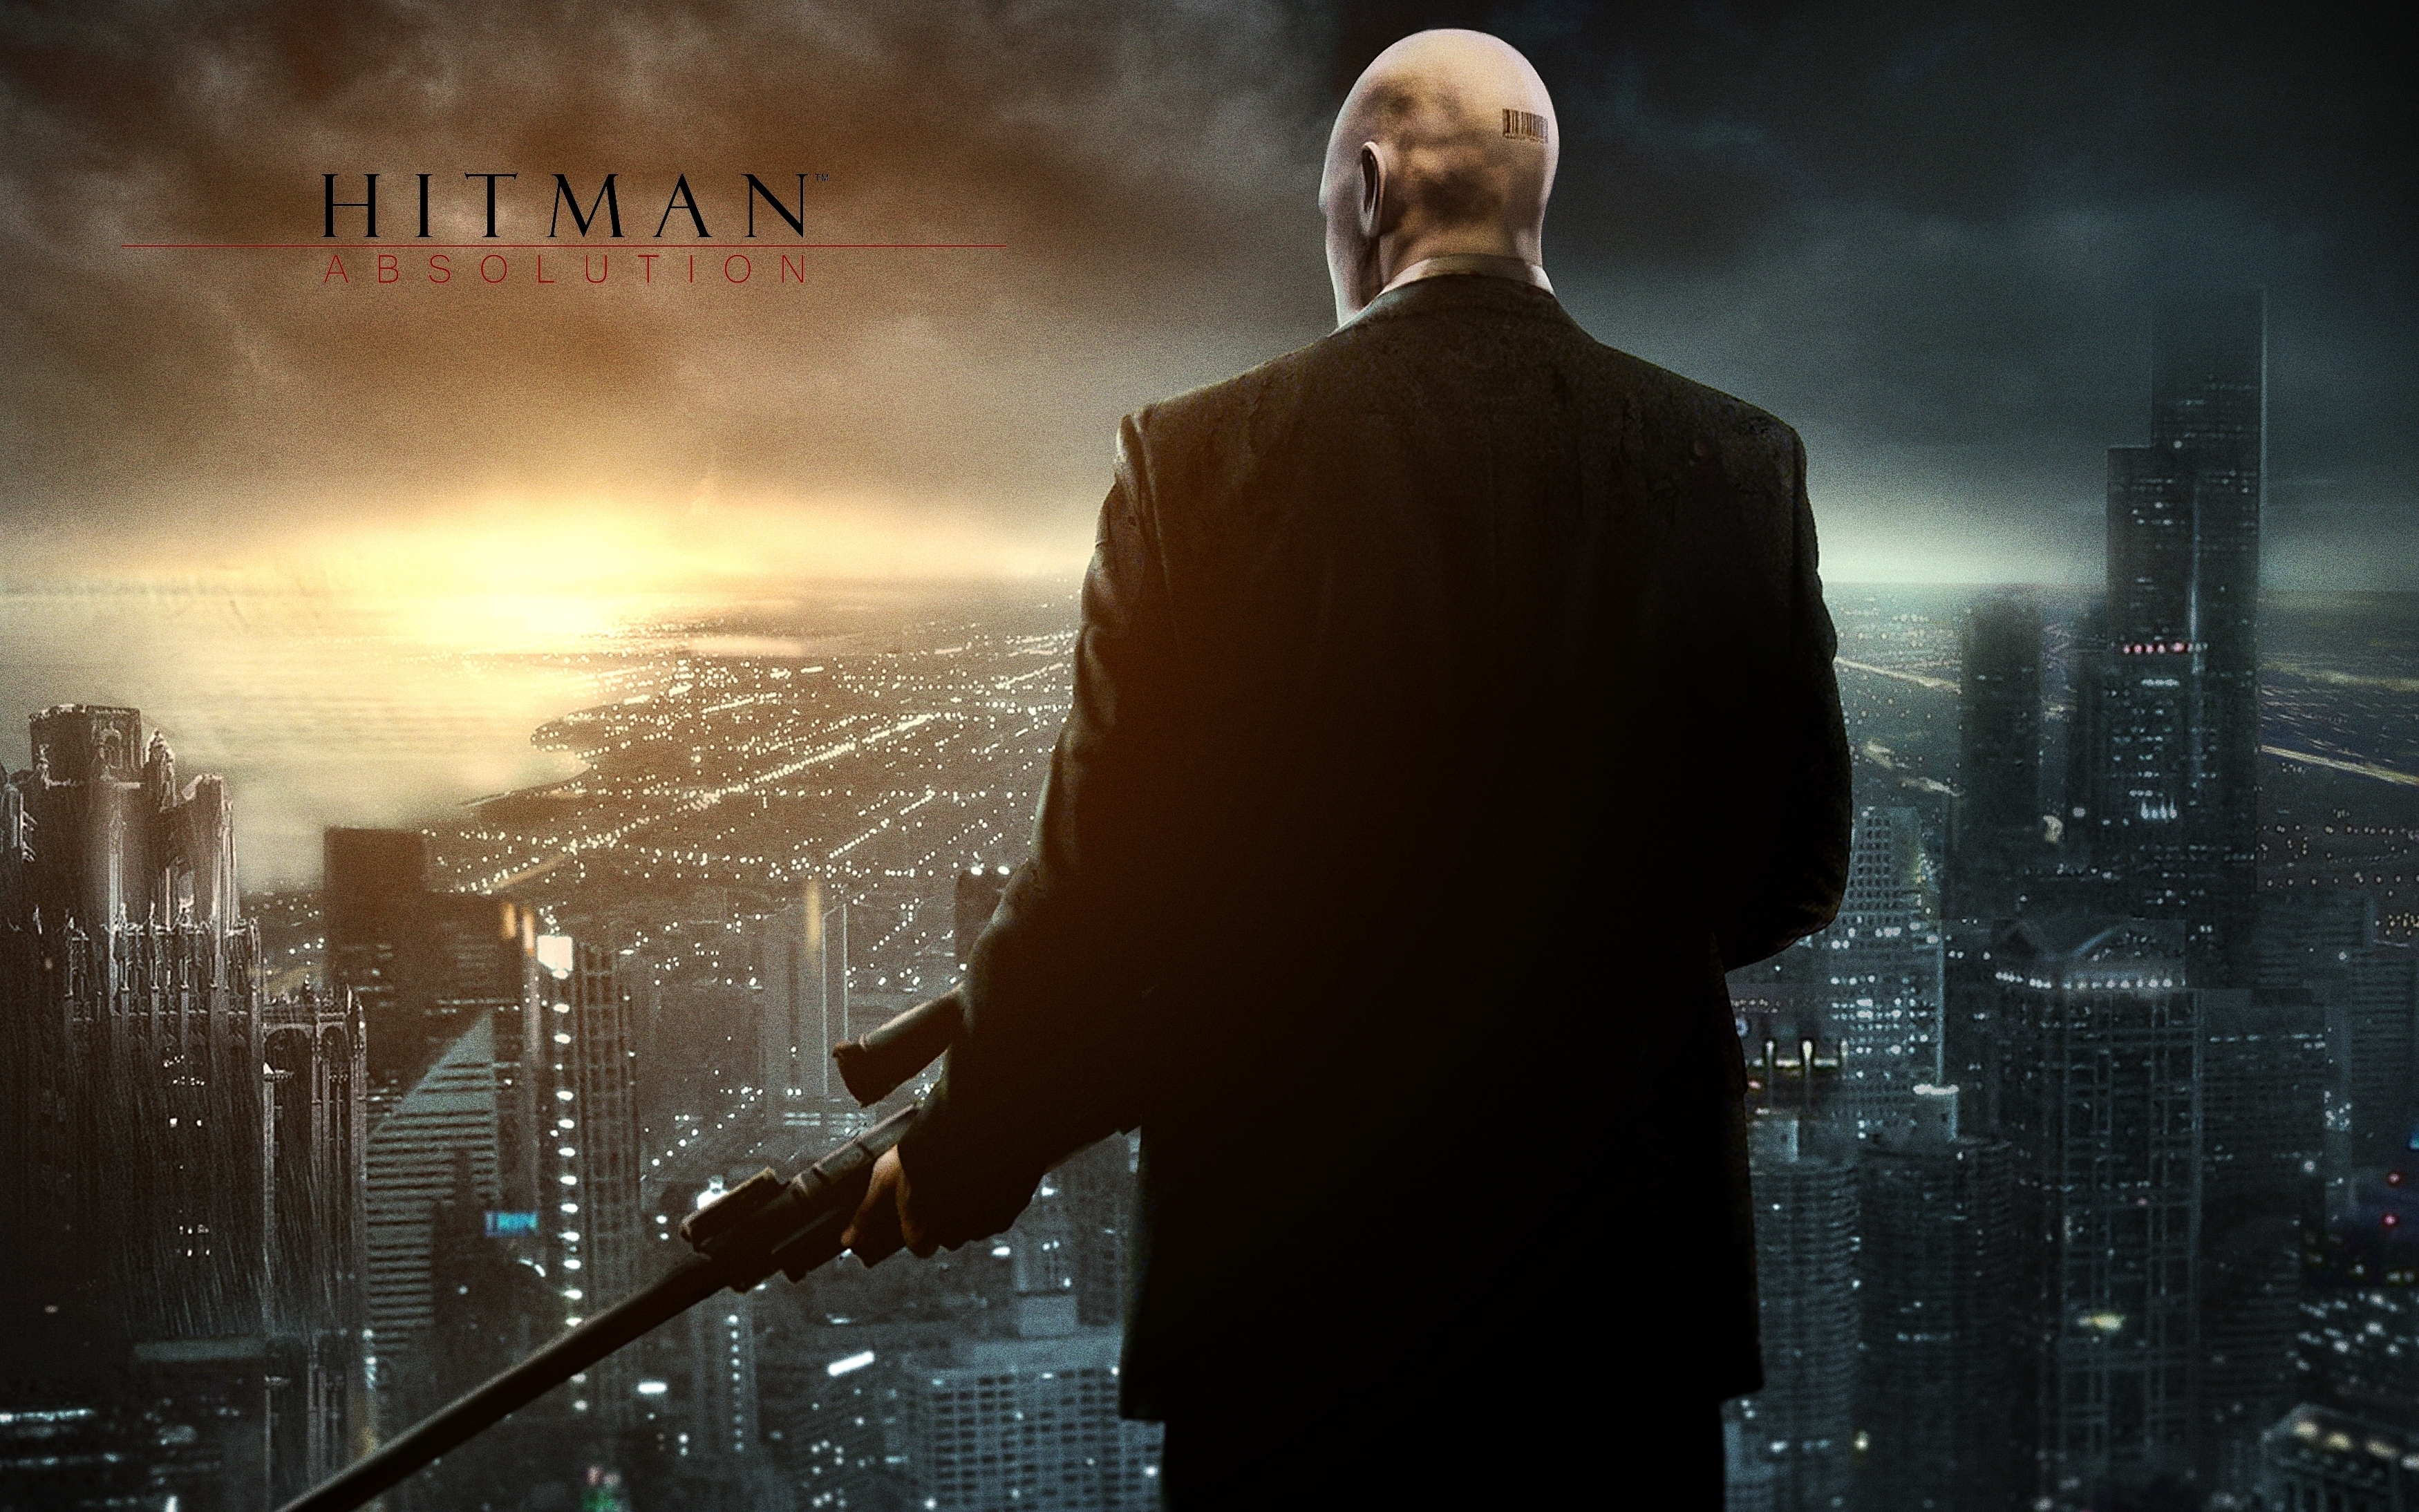 50 Hitman Absolution HD Wallpapers and Backgrounds